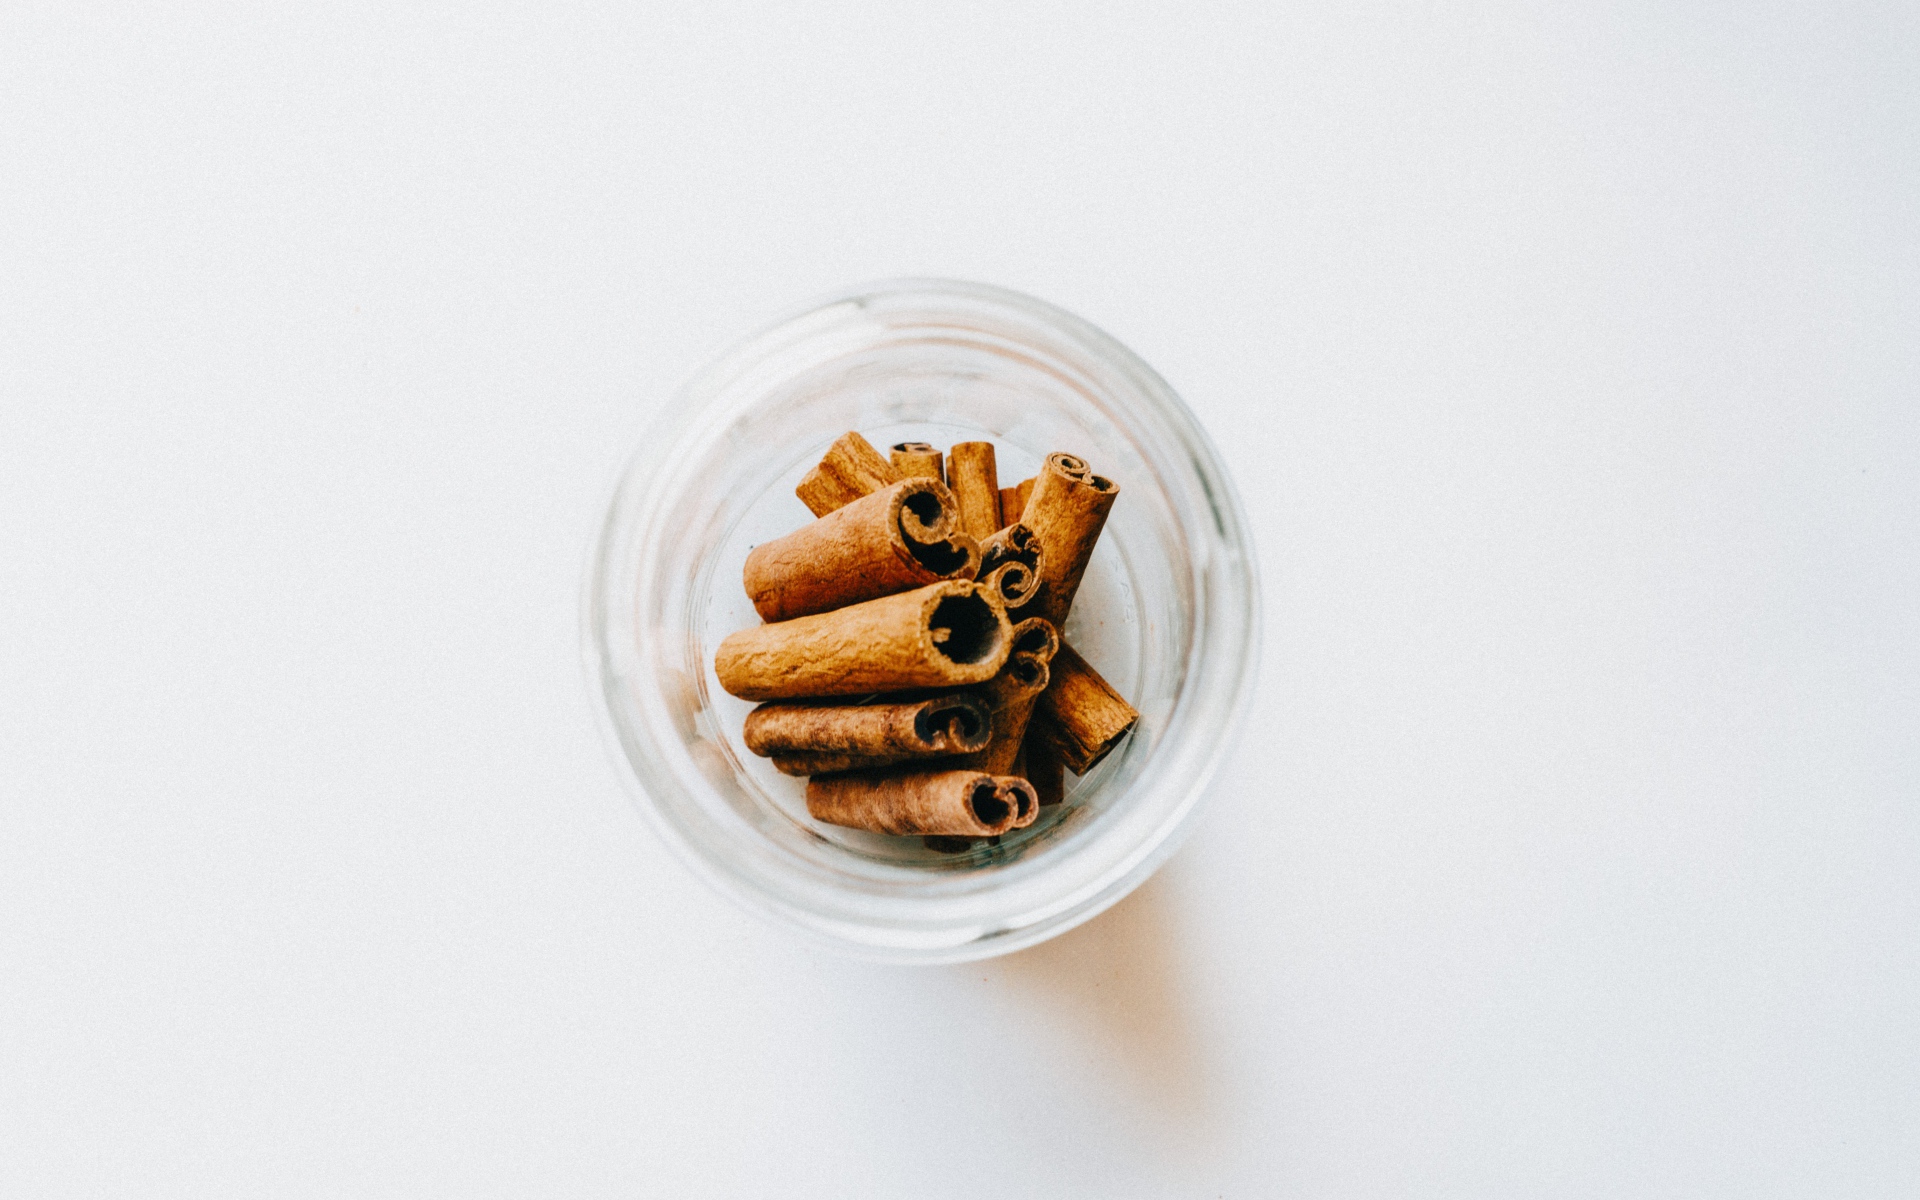 Cinnamon in a glass jar on a white background